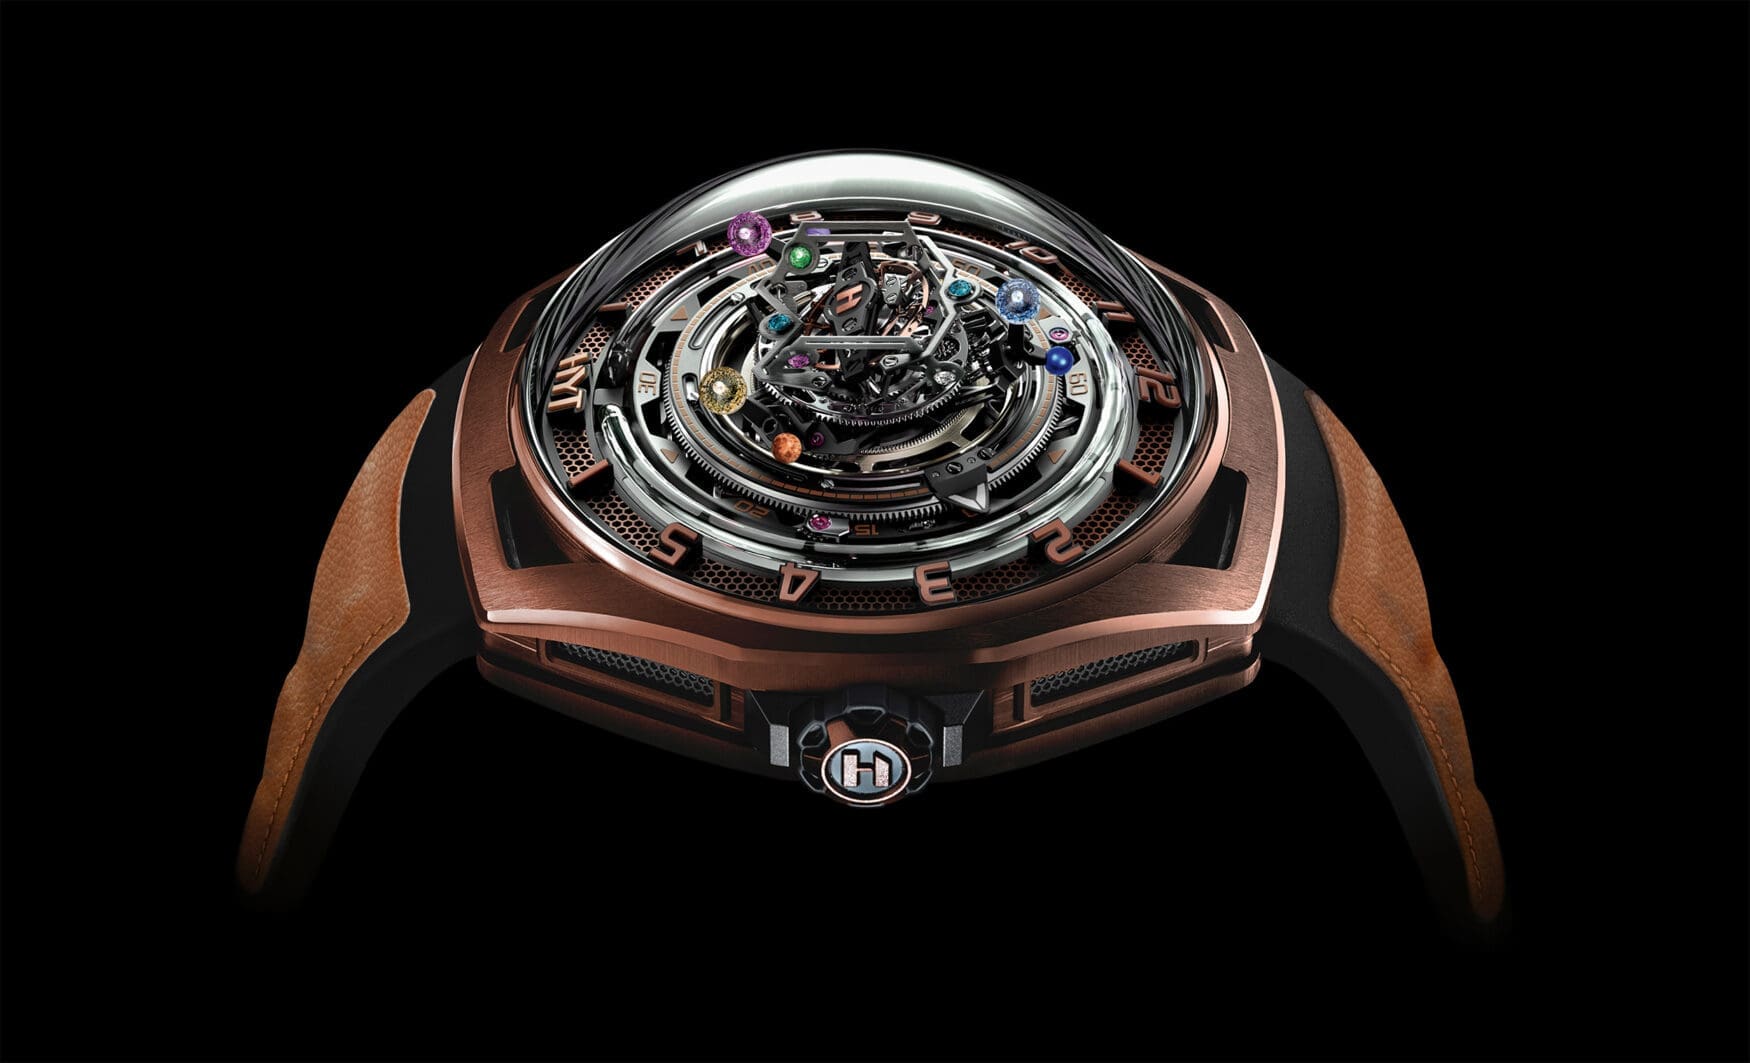 The new HYT Conical Tourbillon Infinity Sapphires is a high complication fit for Thanos